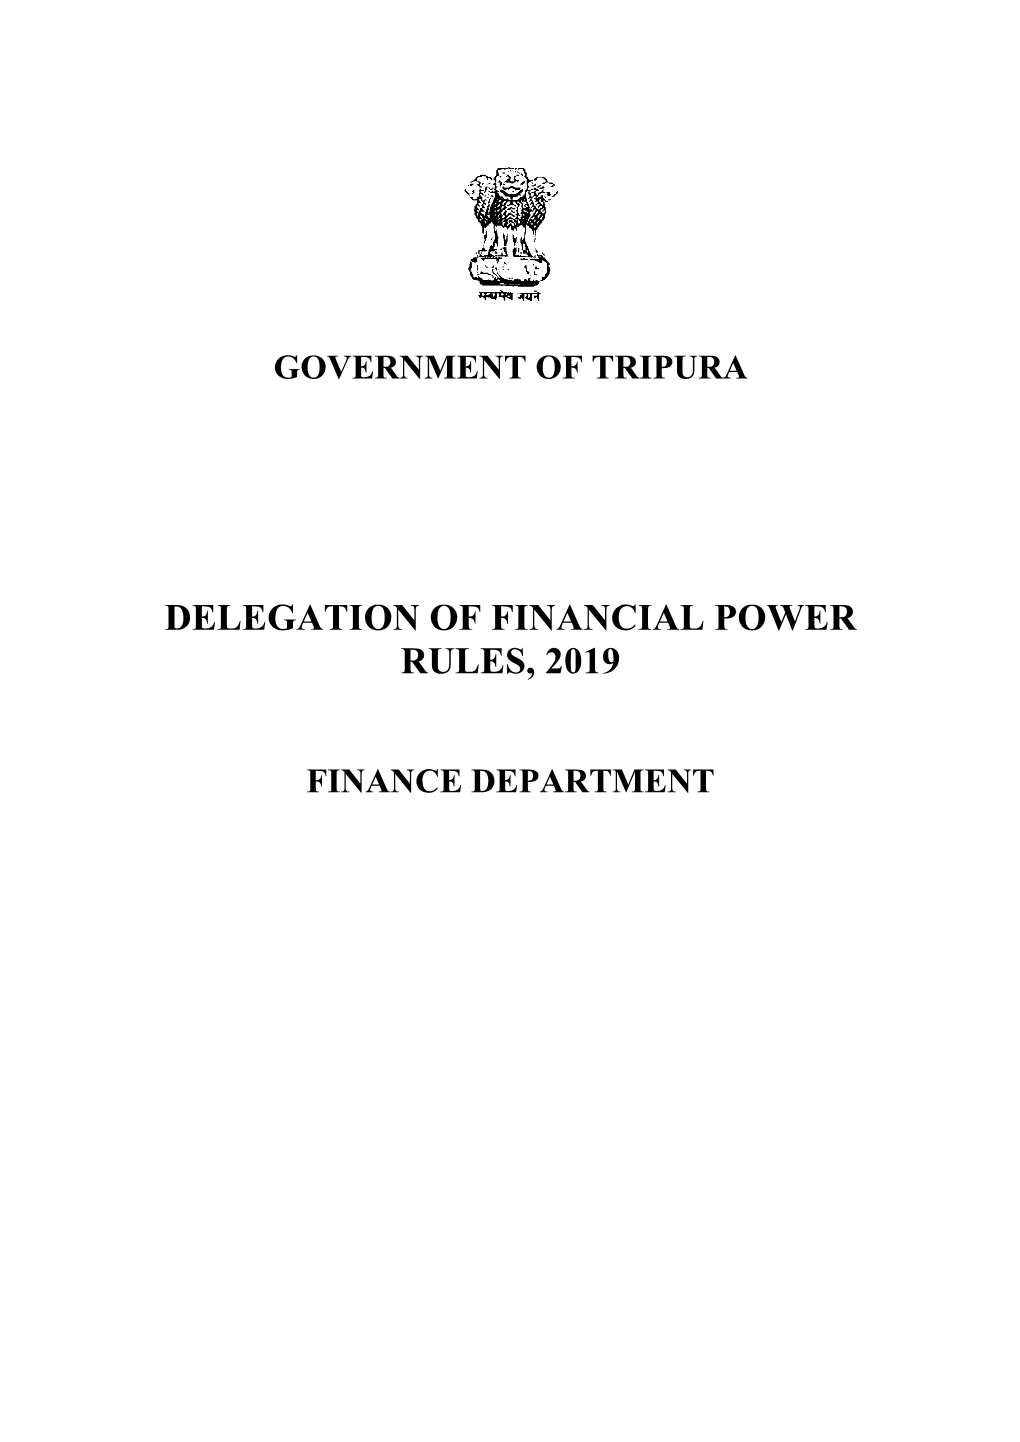 Delegation of Financial Power Rules, 2019